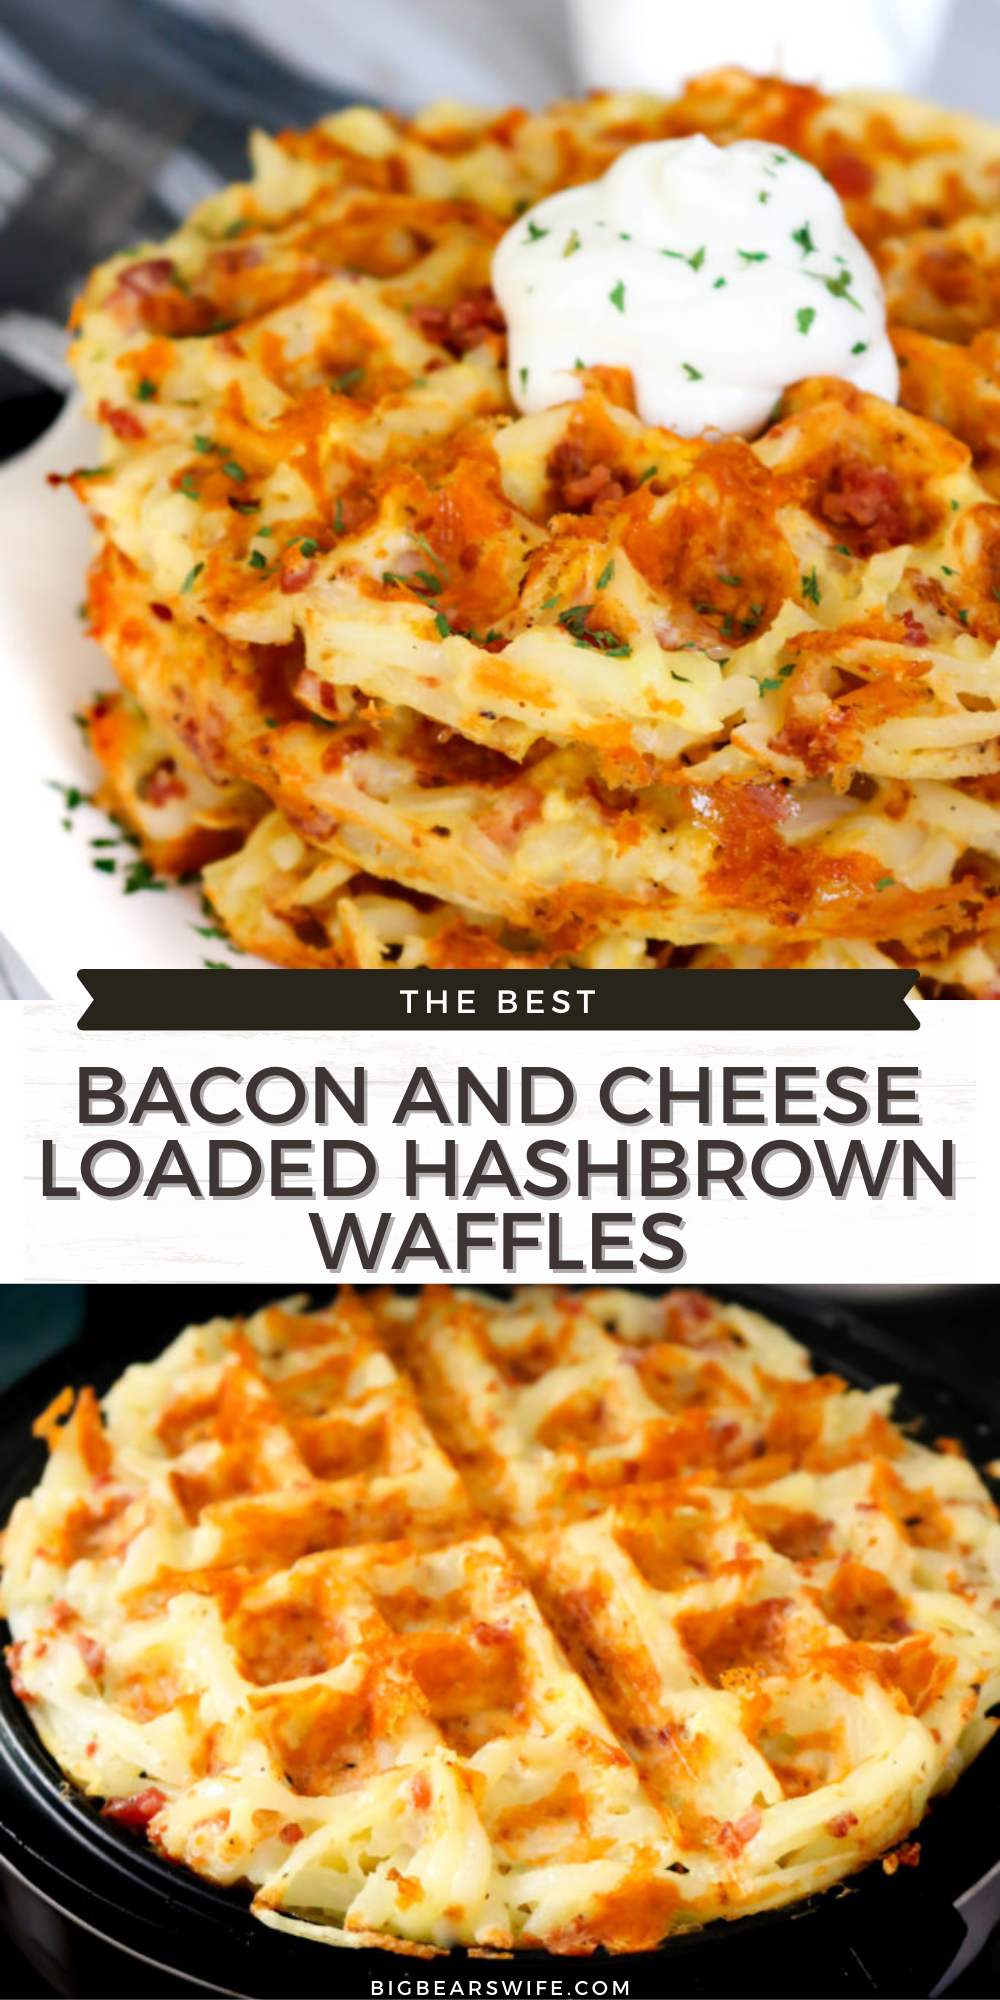 These Bacon and Cheese Loaded Hashbrown Waffles are packed with shredded hashbrowns, eggs, bacon and shredded cheese for the ultimate brunch entree!  via @bigbearswife